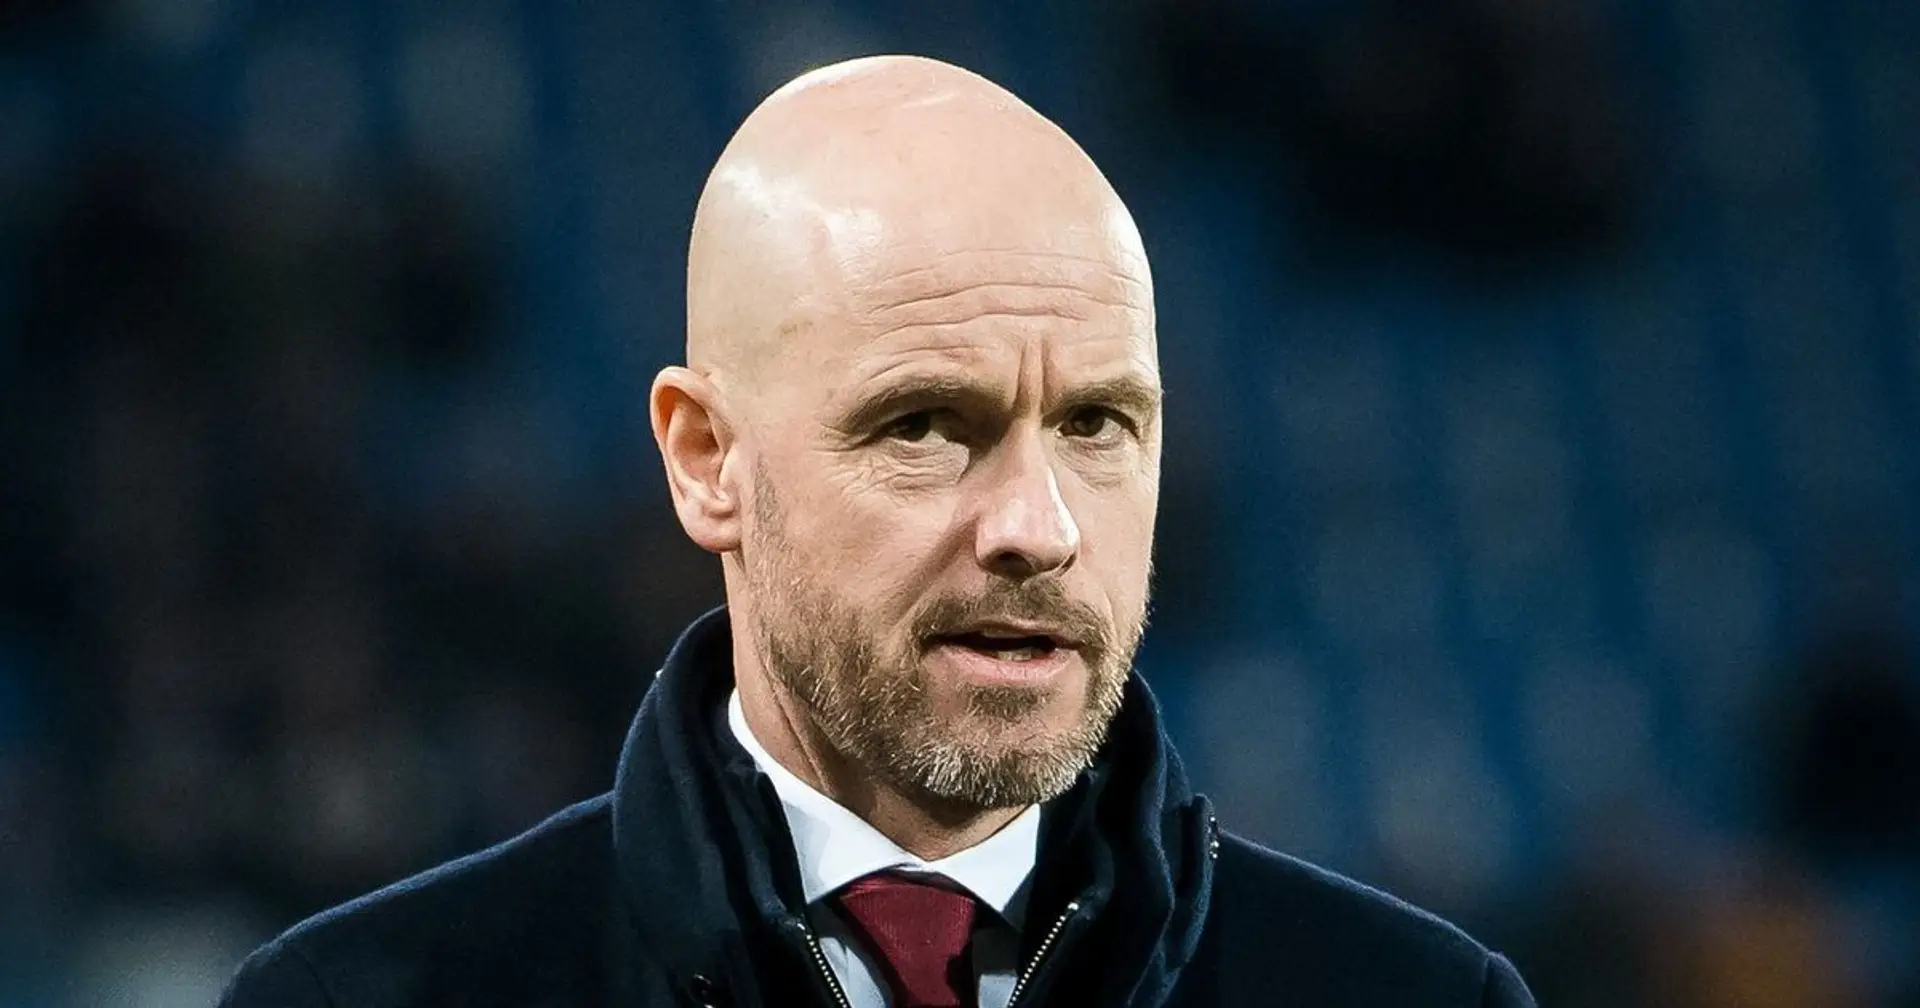 BREAKING: Man United 'set to finalise' Ten Hag appointment (reliability: 4 stars)